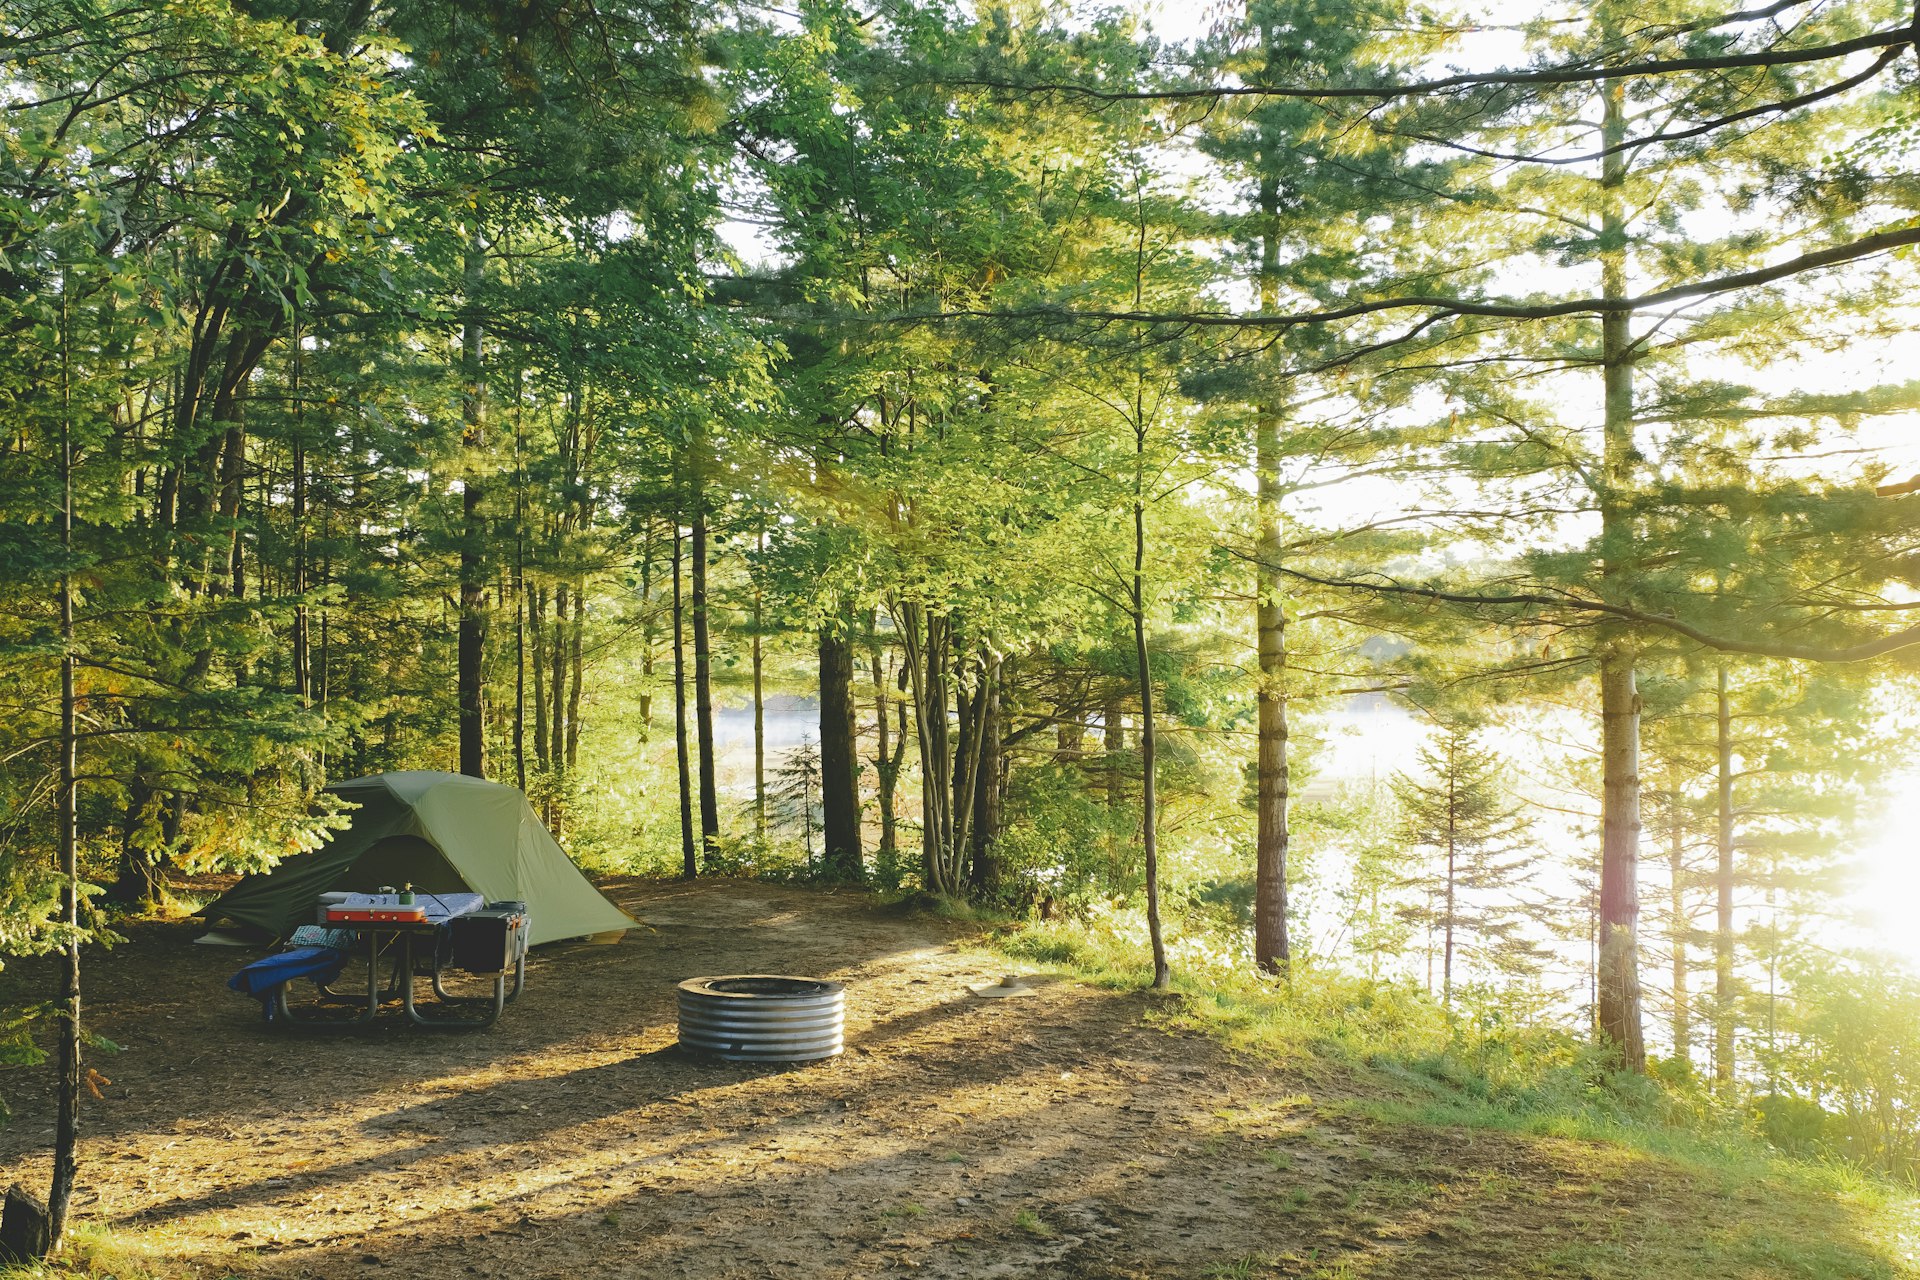 A campsite with a tent, surrounded by trees and greenery as the sun comes up in the morning